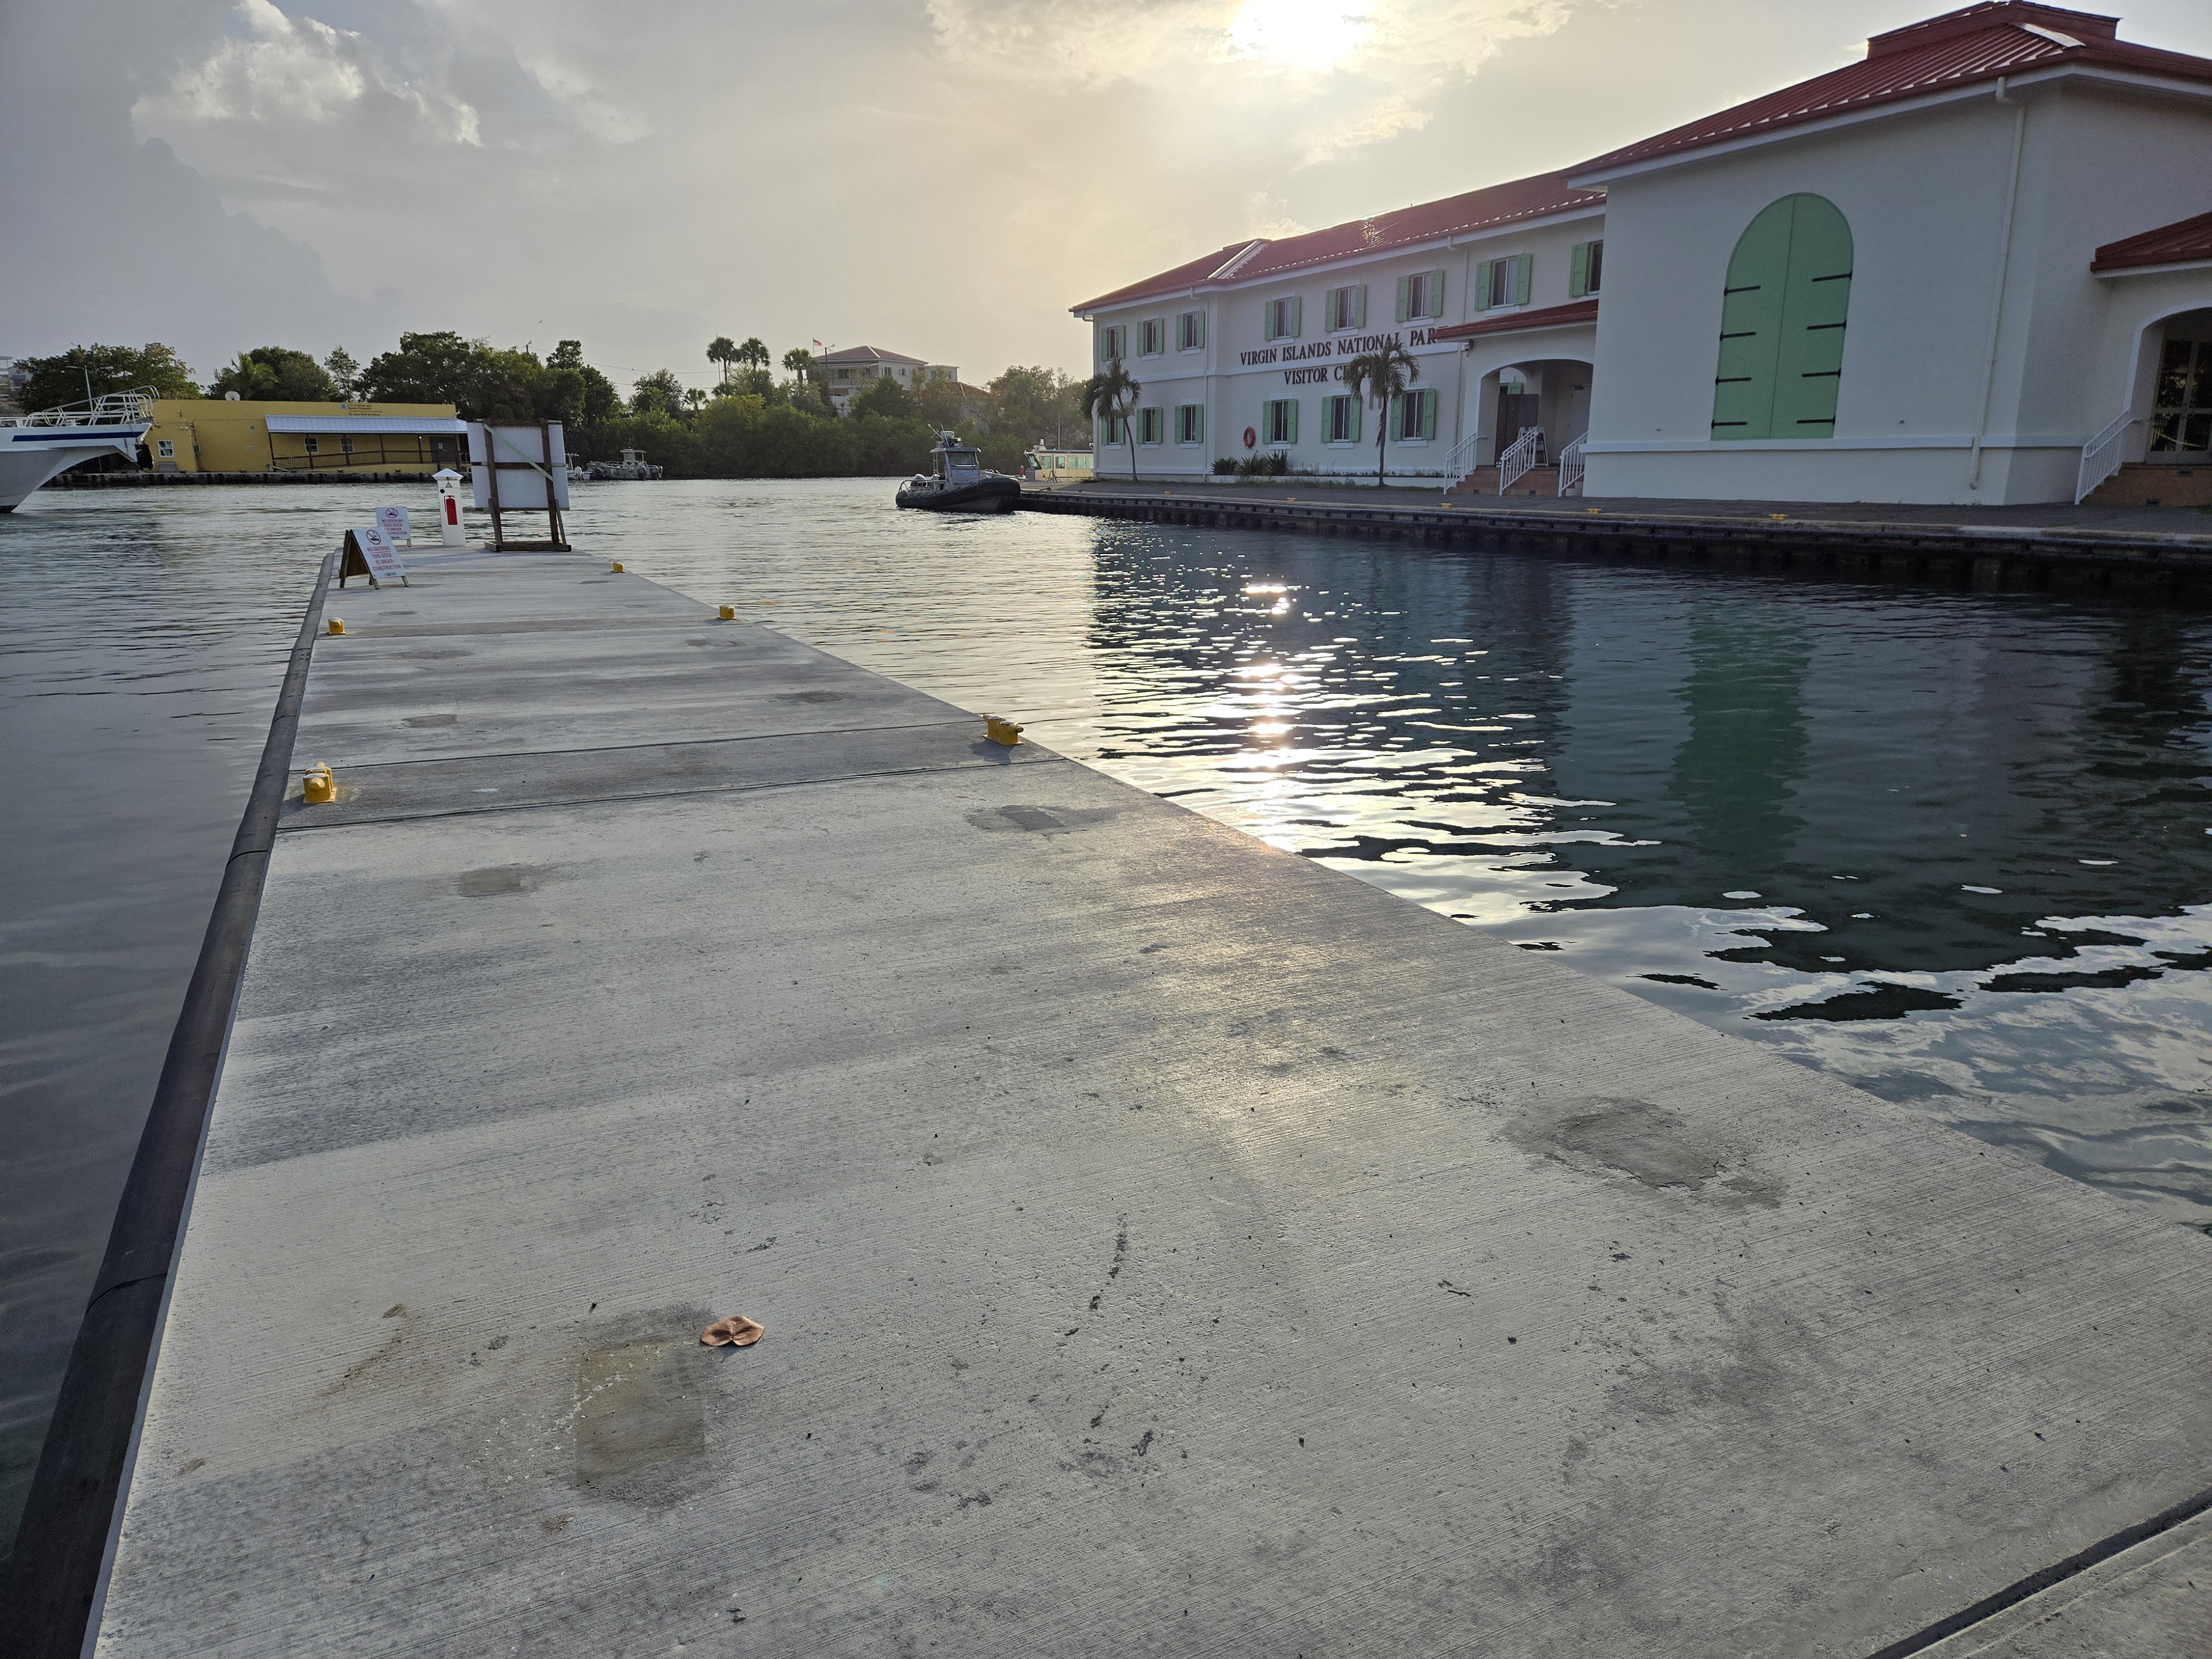 Image of the new finger pier in front of the Virgin Islands National Park Visitor Center